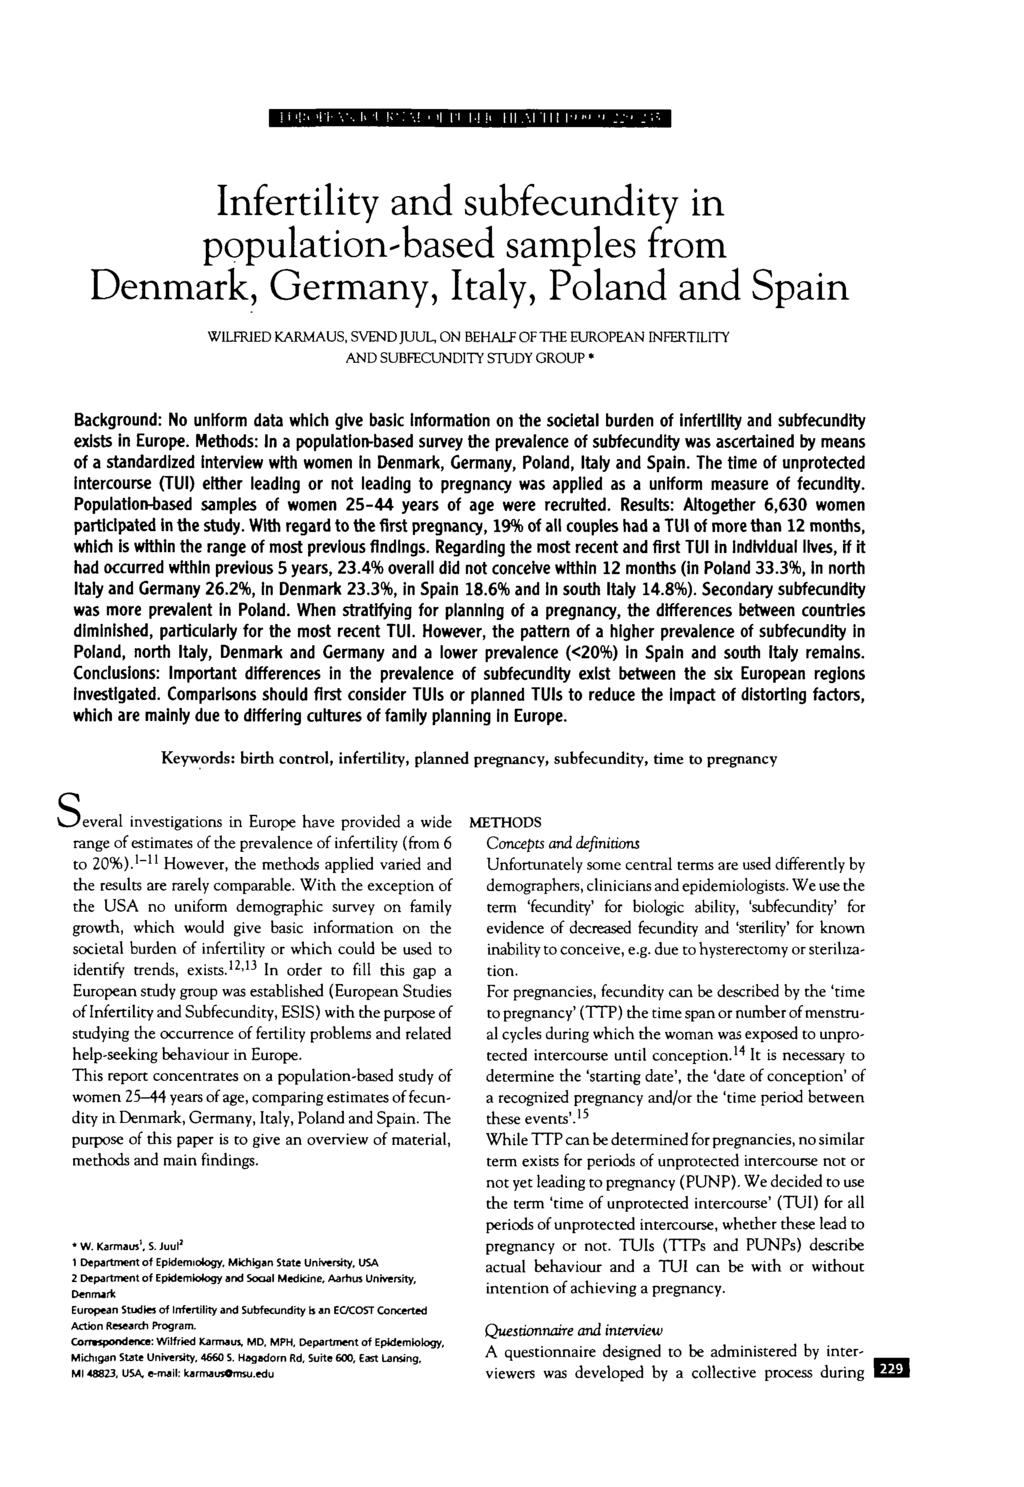 Ifertility ad subfecudity i populatio-based samples from Demark, Germay, Italy, Polad ad Spai W1LFR1ED KARMAUS, SVEND JUUL, ON BEHALF OF THE EUROPEAN INFERTILITY AND SUBFECUNDITY STUDY GROUP